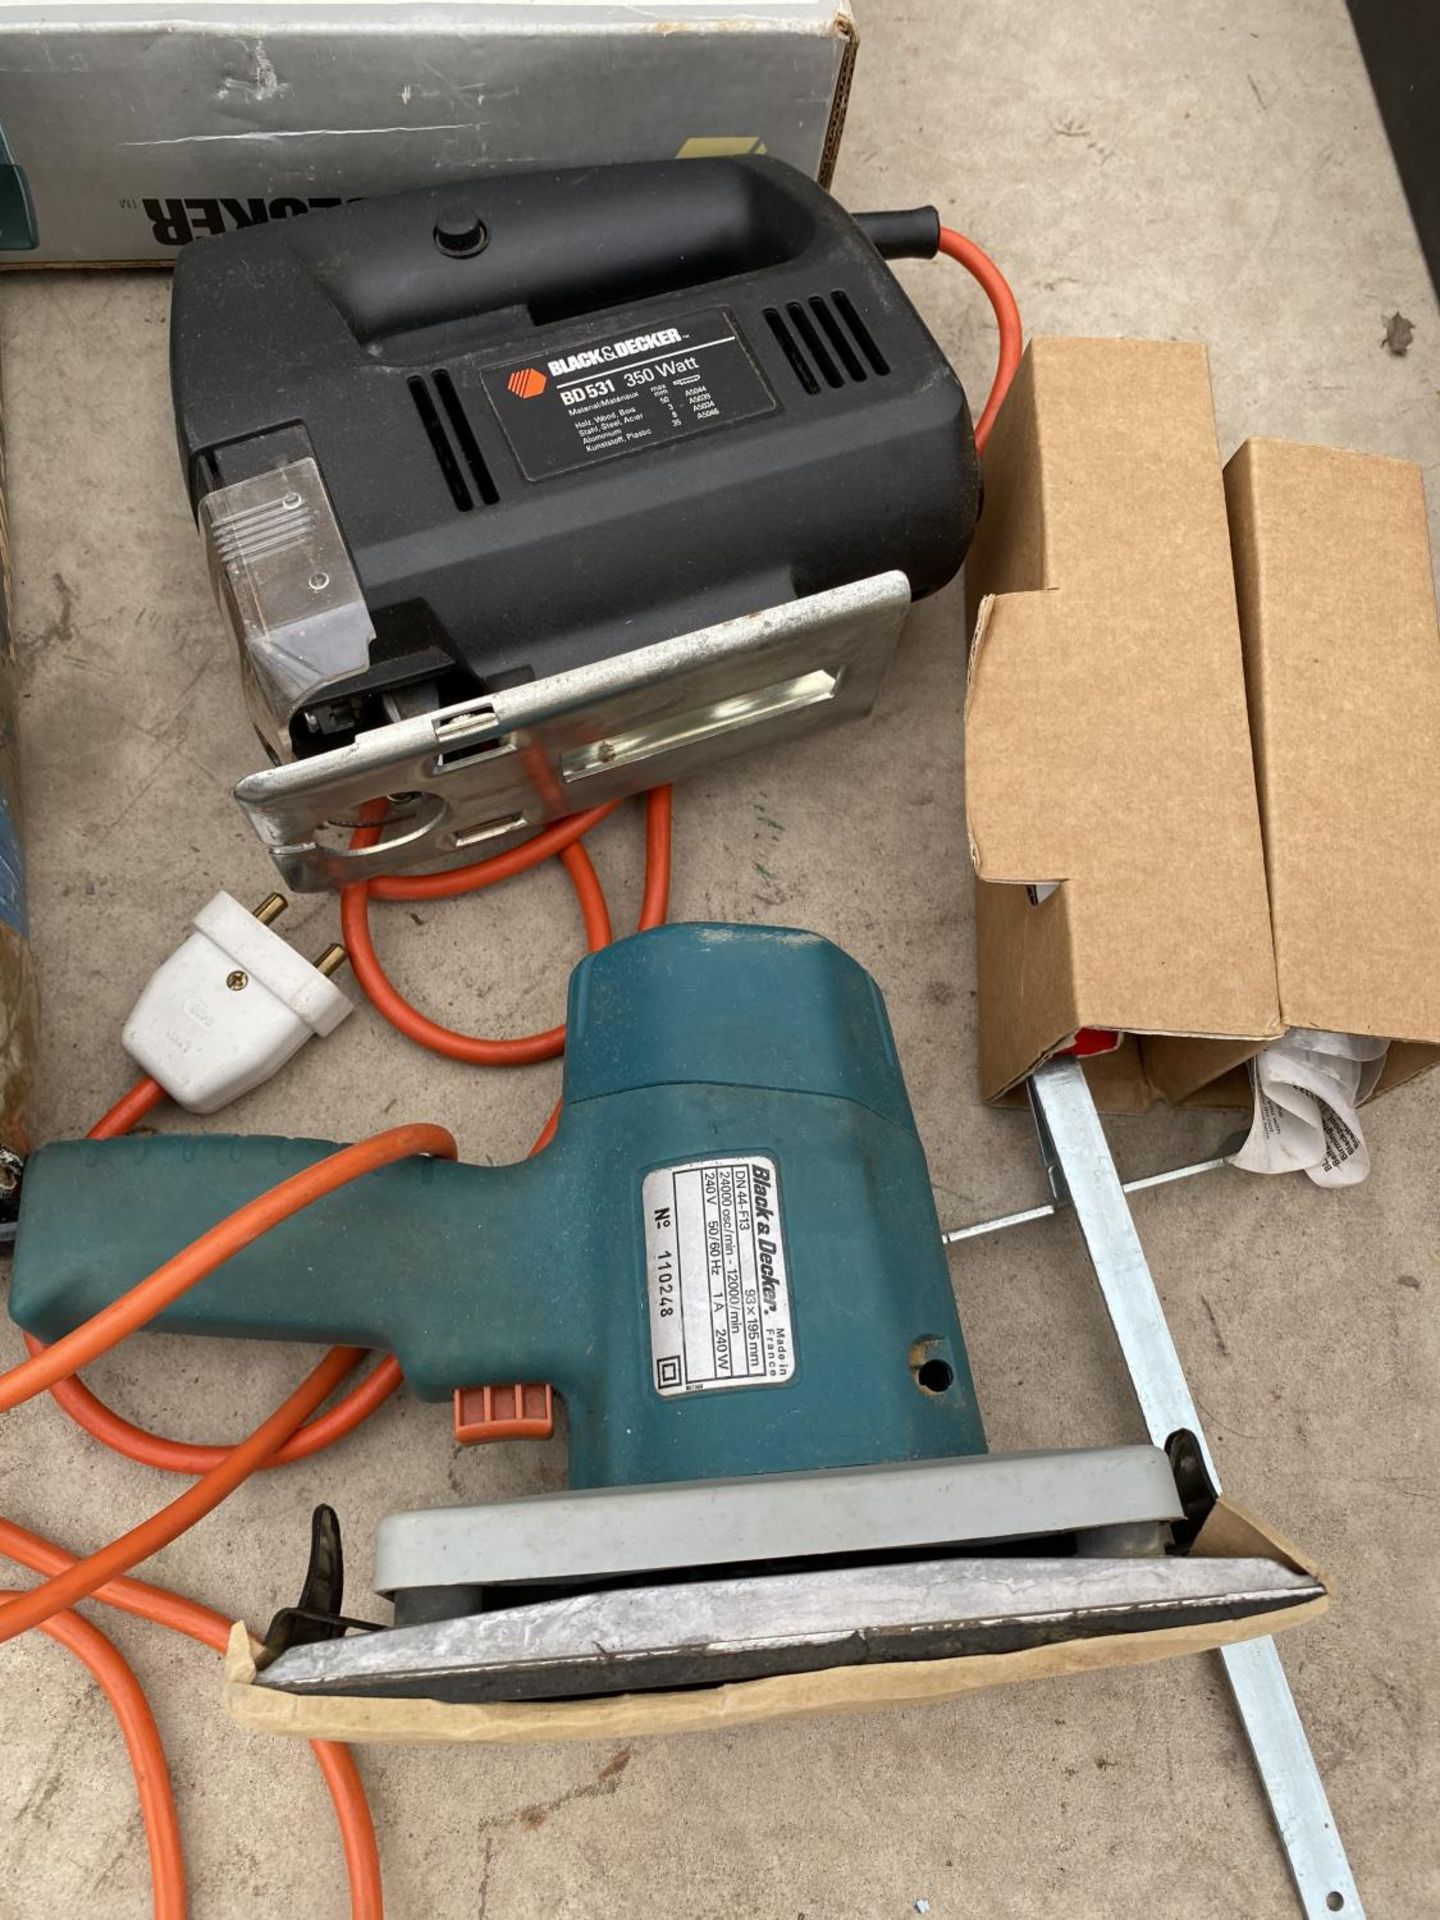 A BLACK AND DECKER SANDER AND A BLACK AND DECKER JIGSAW - Image 2 of 3